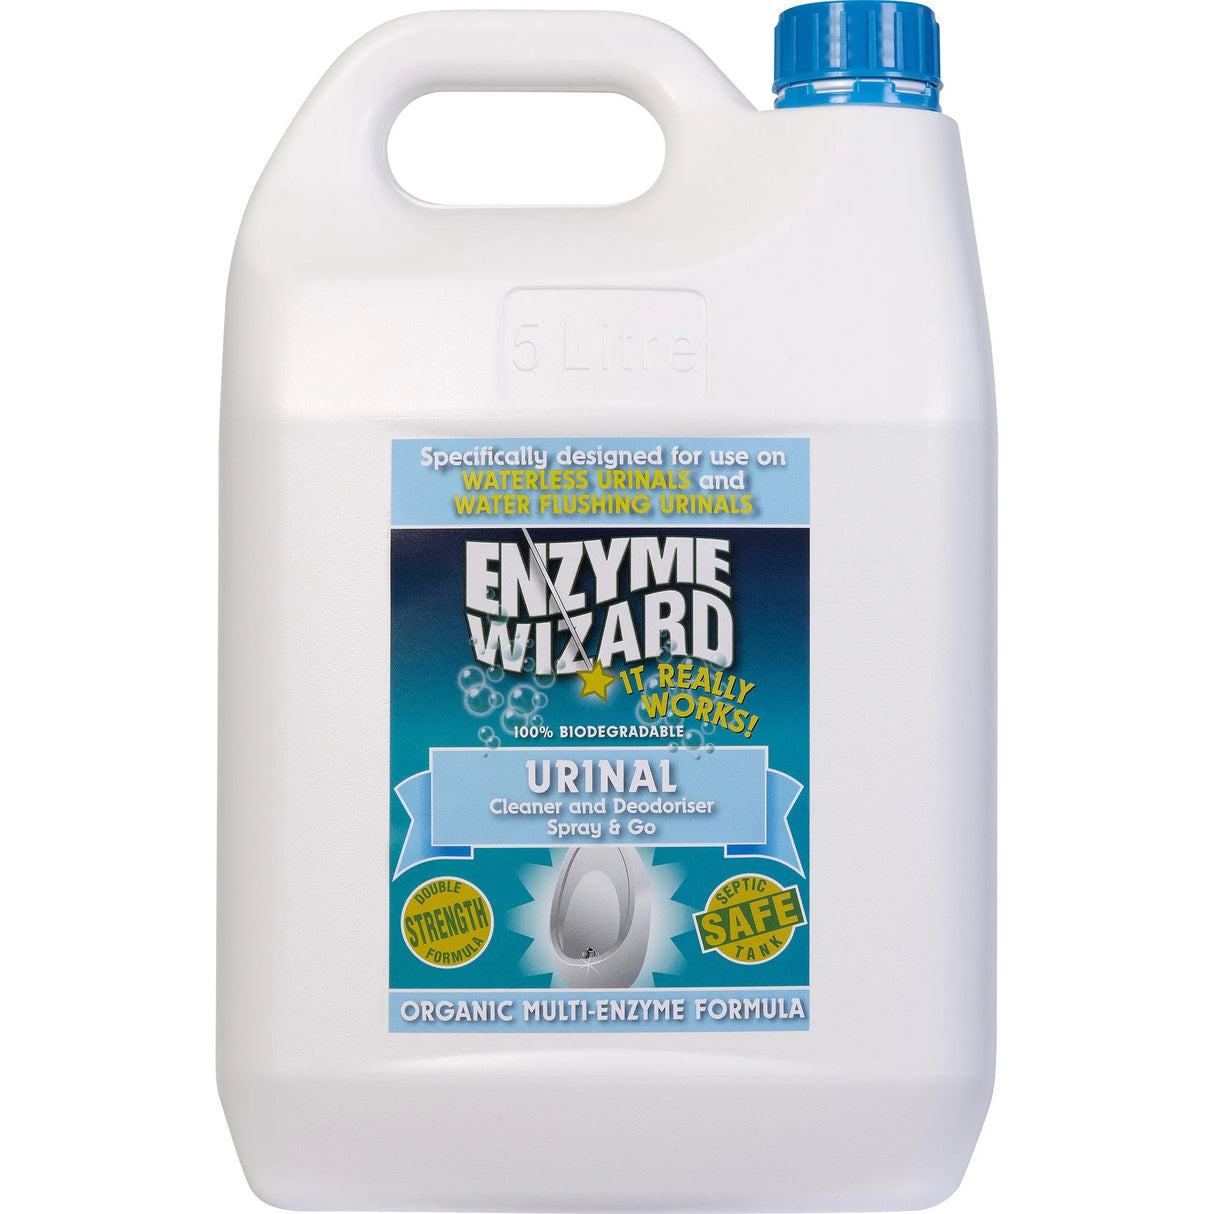 ENZYME WIZARD URINAL CLEANER 5 LITRE (Pack of 3)